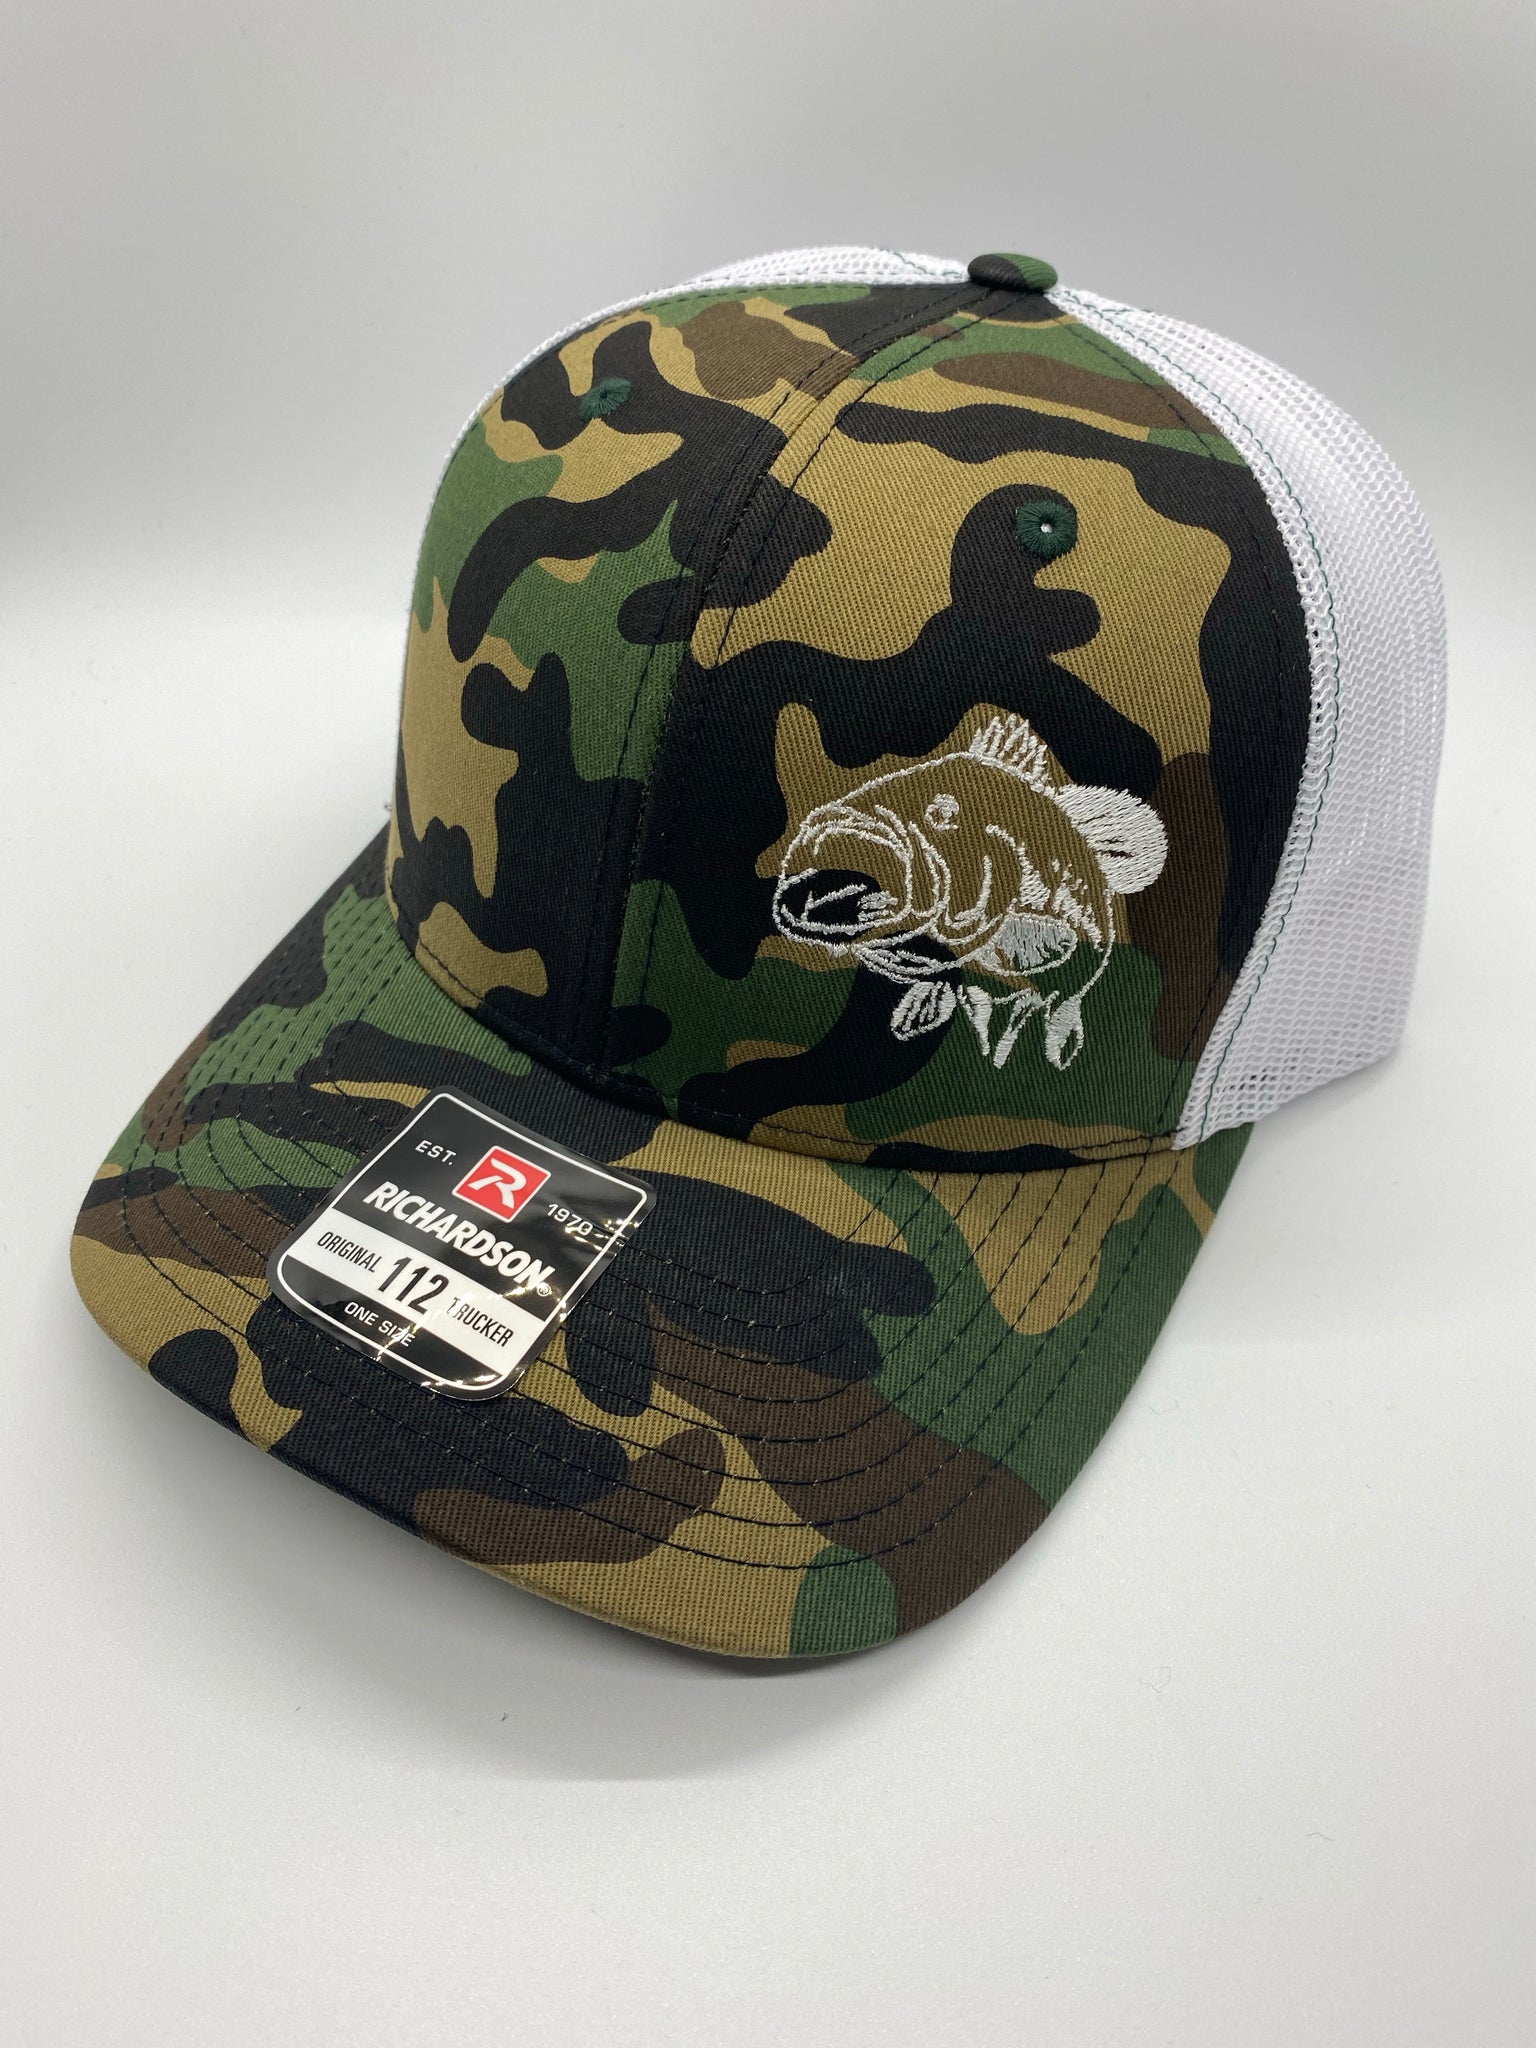 Flying Fisherman Men's Camo Bass Patch Trucker Hat at Tractor